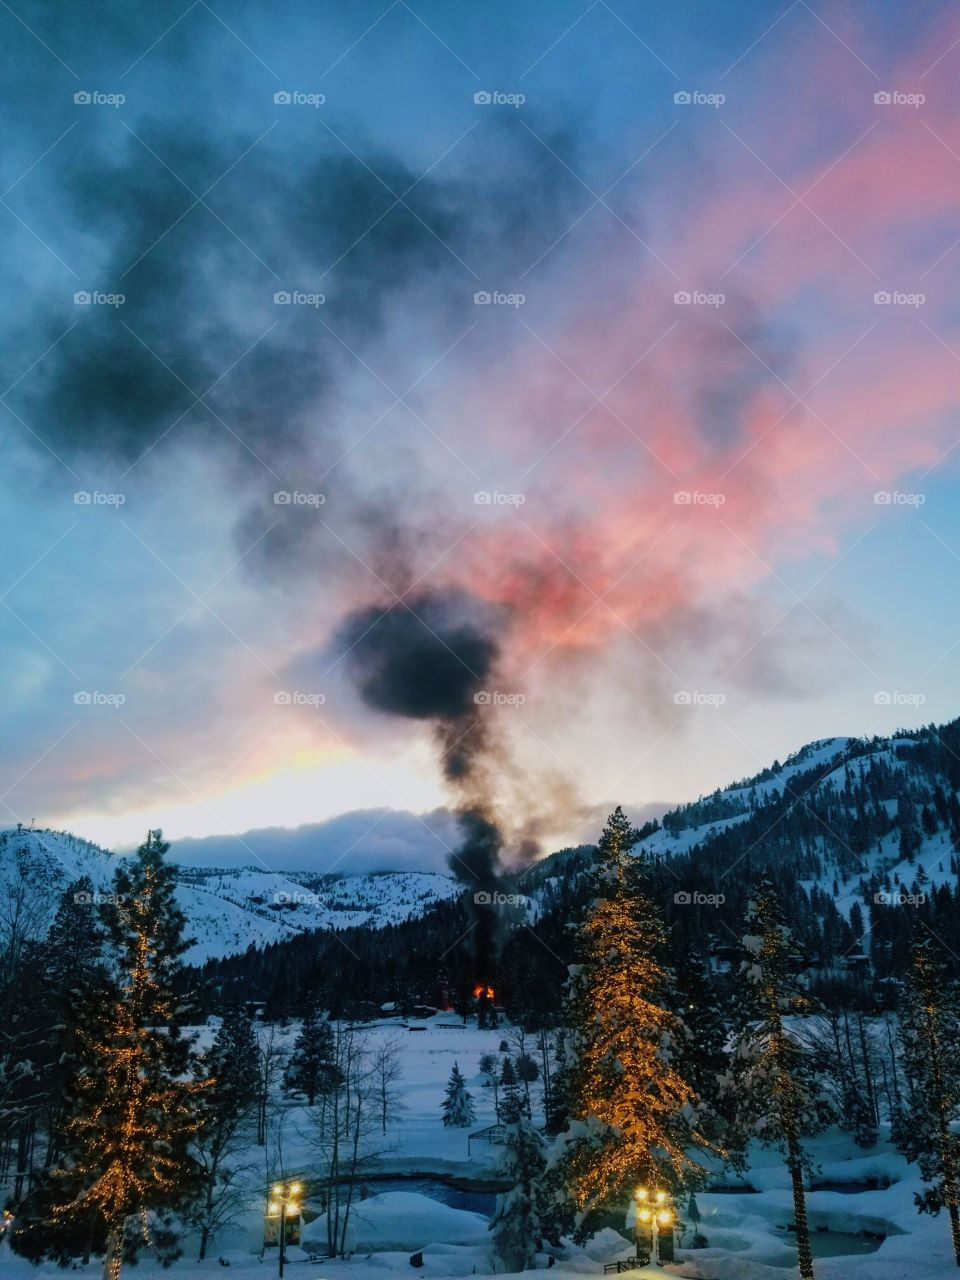 A glowing smokey sunset in the Sierra Nevada winter mountains.